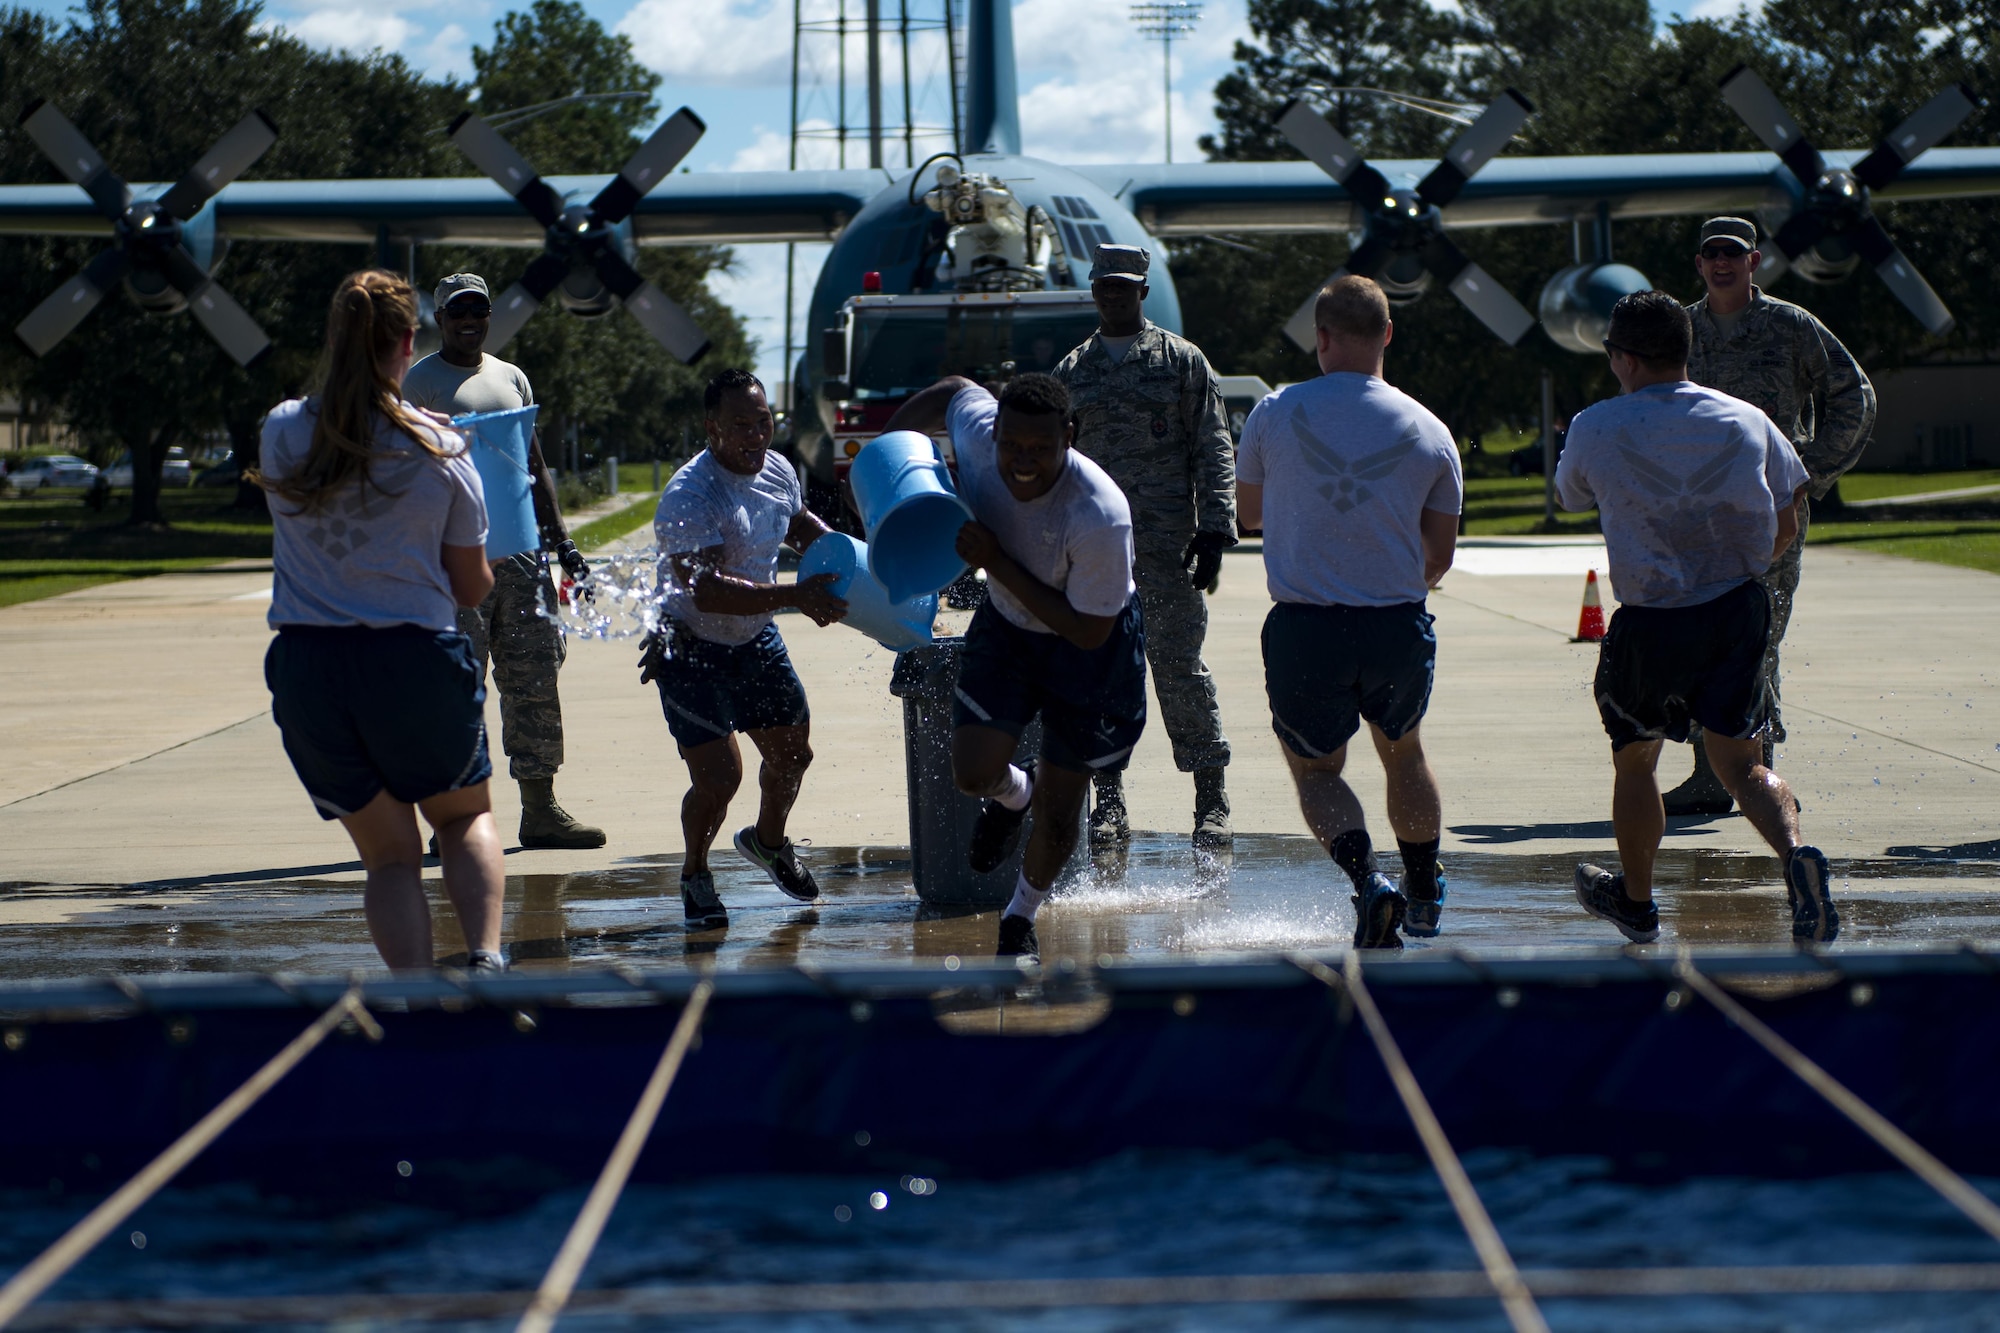 Airmen assigned to the 23d Security Force Squadron run to fill a trash can with water in the “bucket brigade” event during the 2017 Fire Prevention Week Fire Muster, Oct. 13, 2017, at Moody Air Force Base, Ga. The 23d Civil Engineer Squadron fire department designed the muster to allow teams of Airmen to compete in several events, ranging from a hose roll to a fire truck pull. Event organizers wanted Airmen to experience being a firefighter in a way that got people active. (U.S. Air Force photo by Airman 1st Class Erick Requadt)